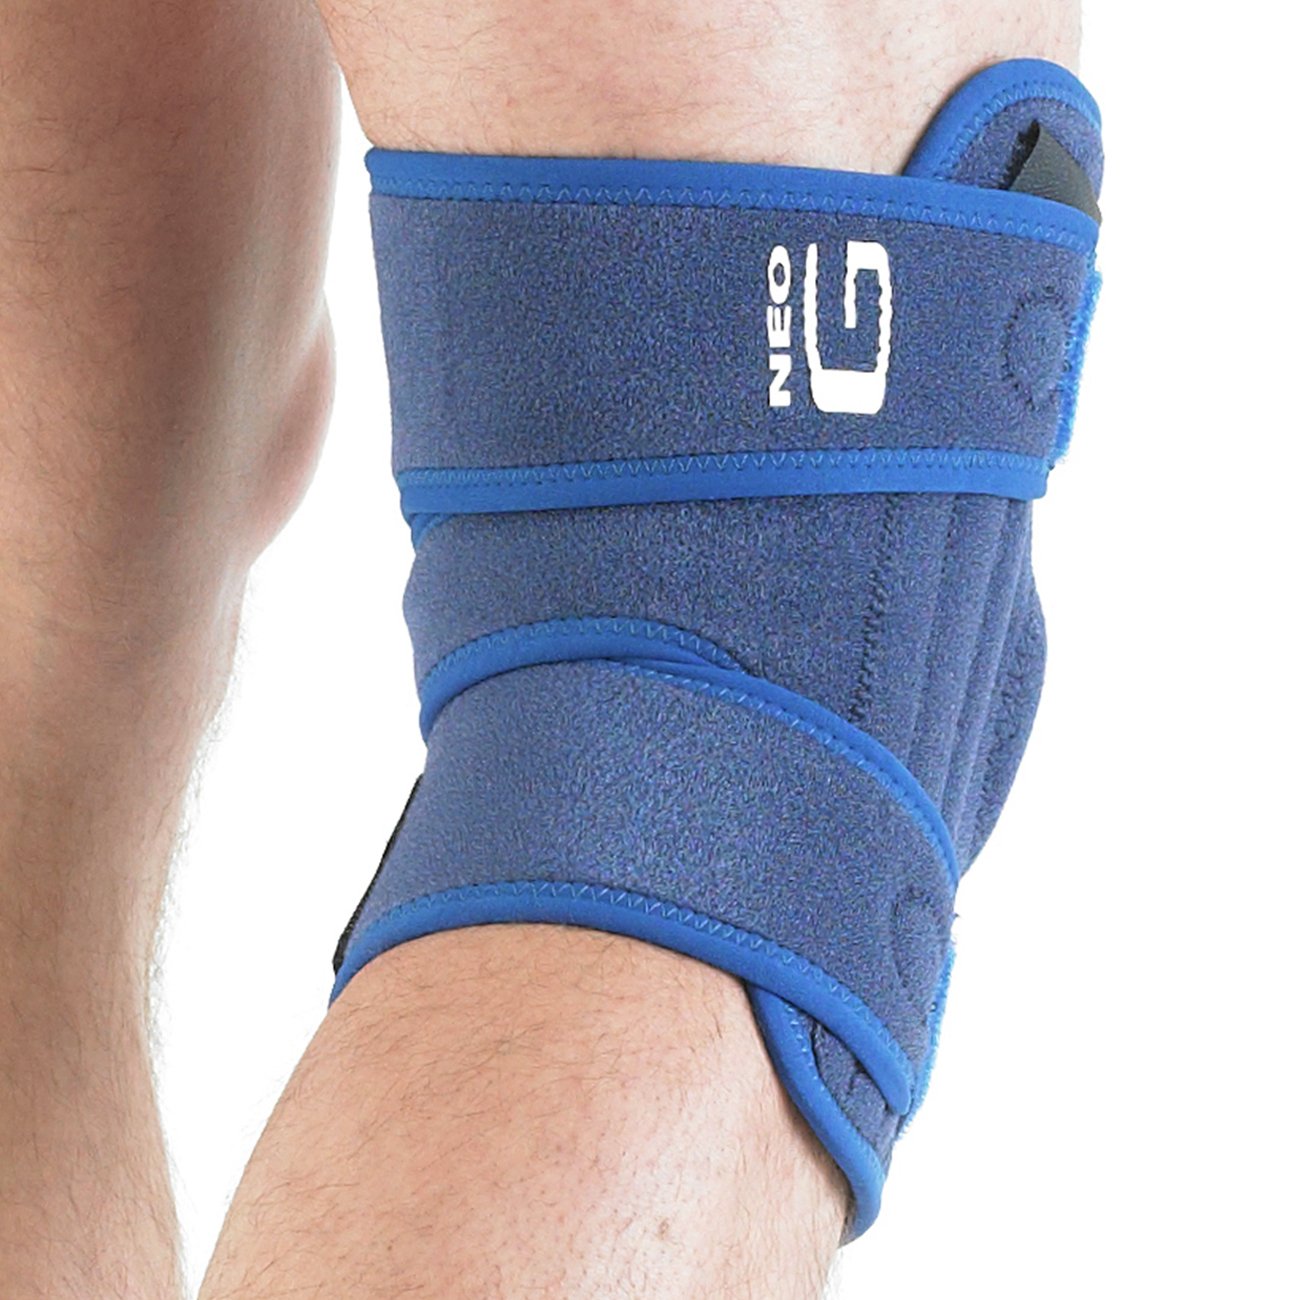 Neo G Stabilized Open Knee Support Reviews